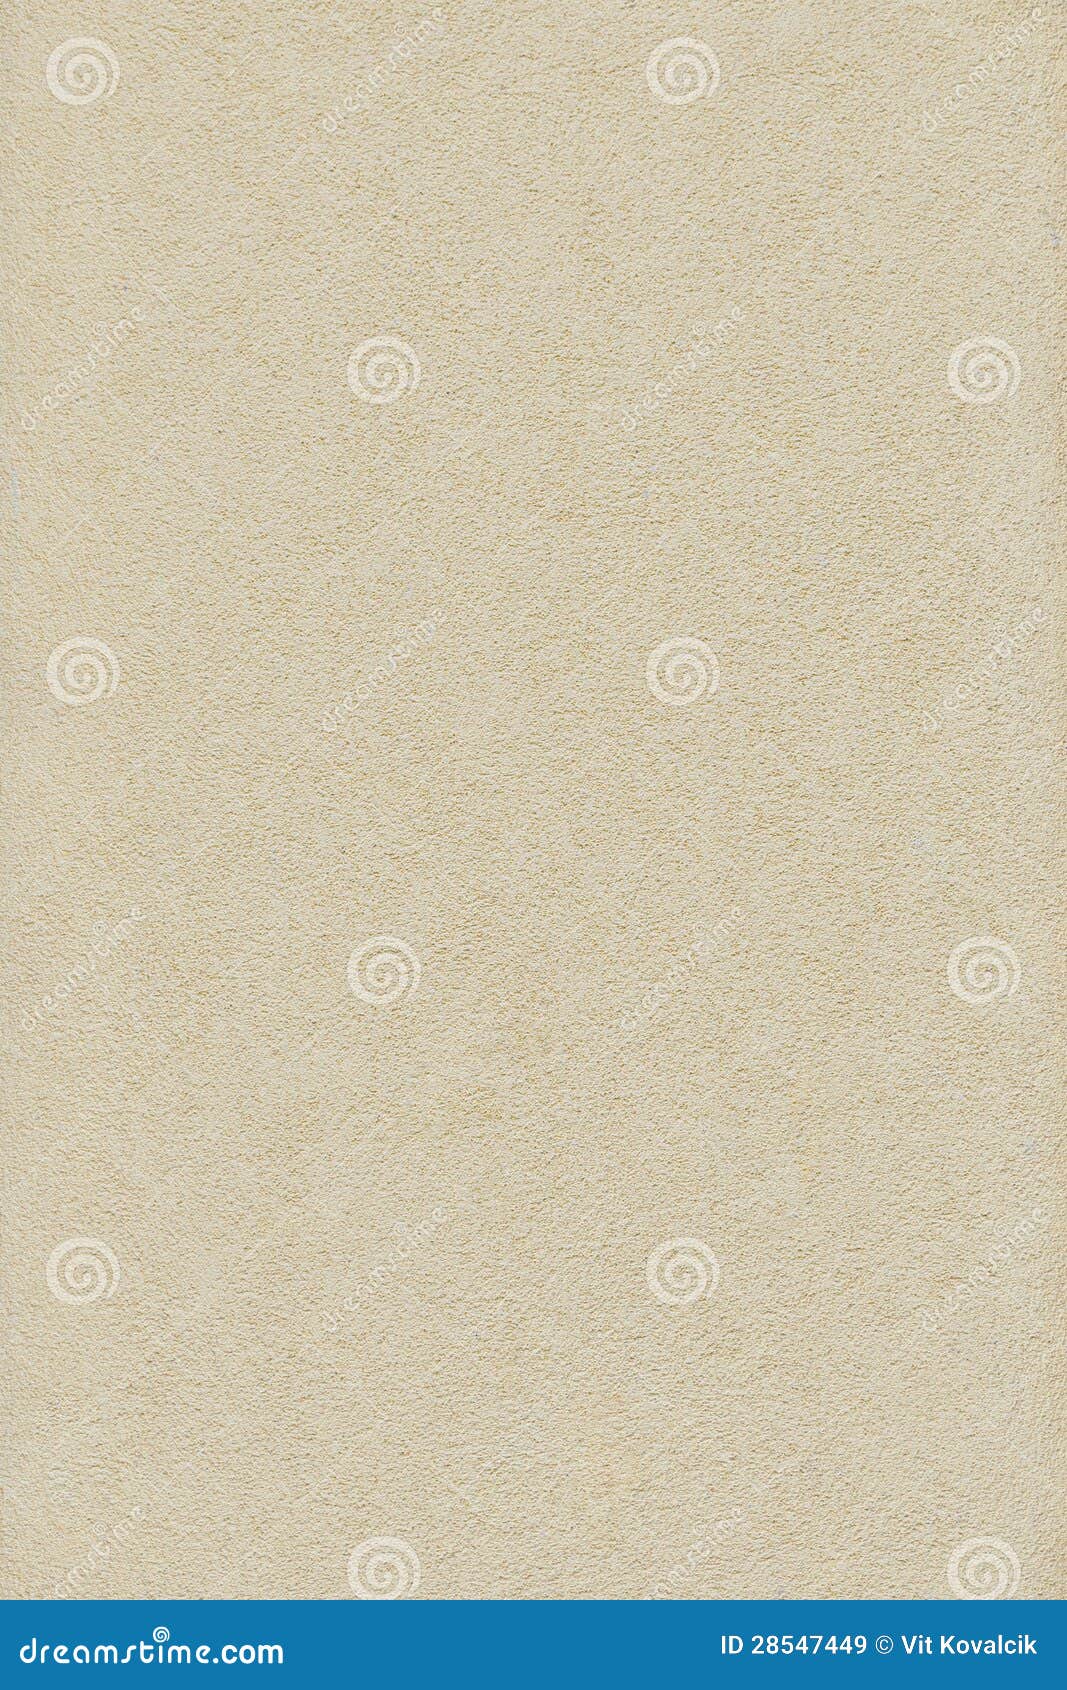 Yellow Sandy Plaster Texture Stock Image - Image of sandy, abstract ...